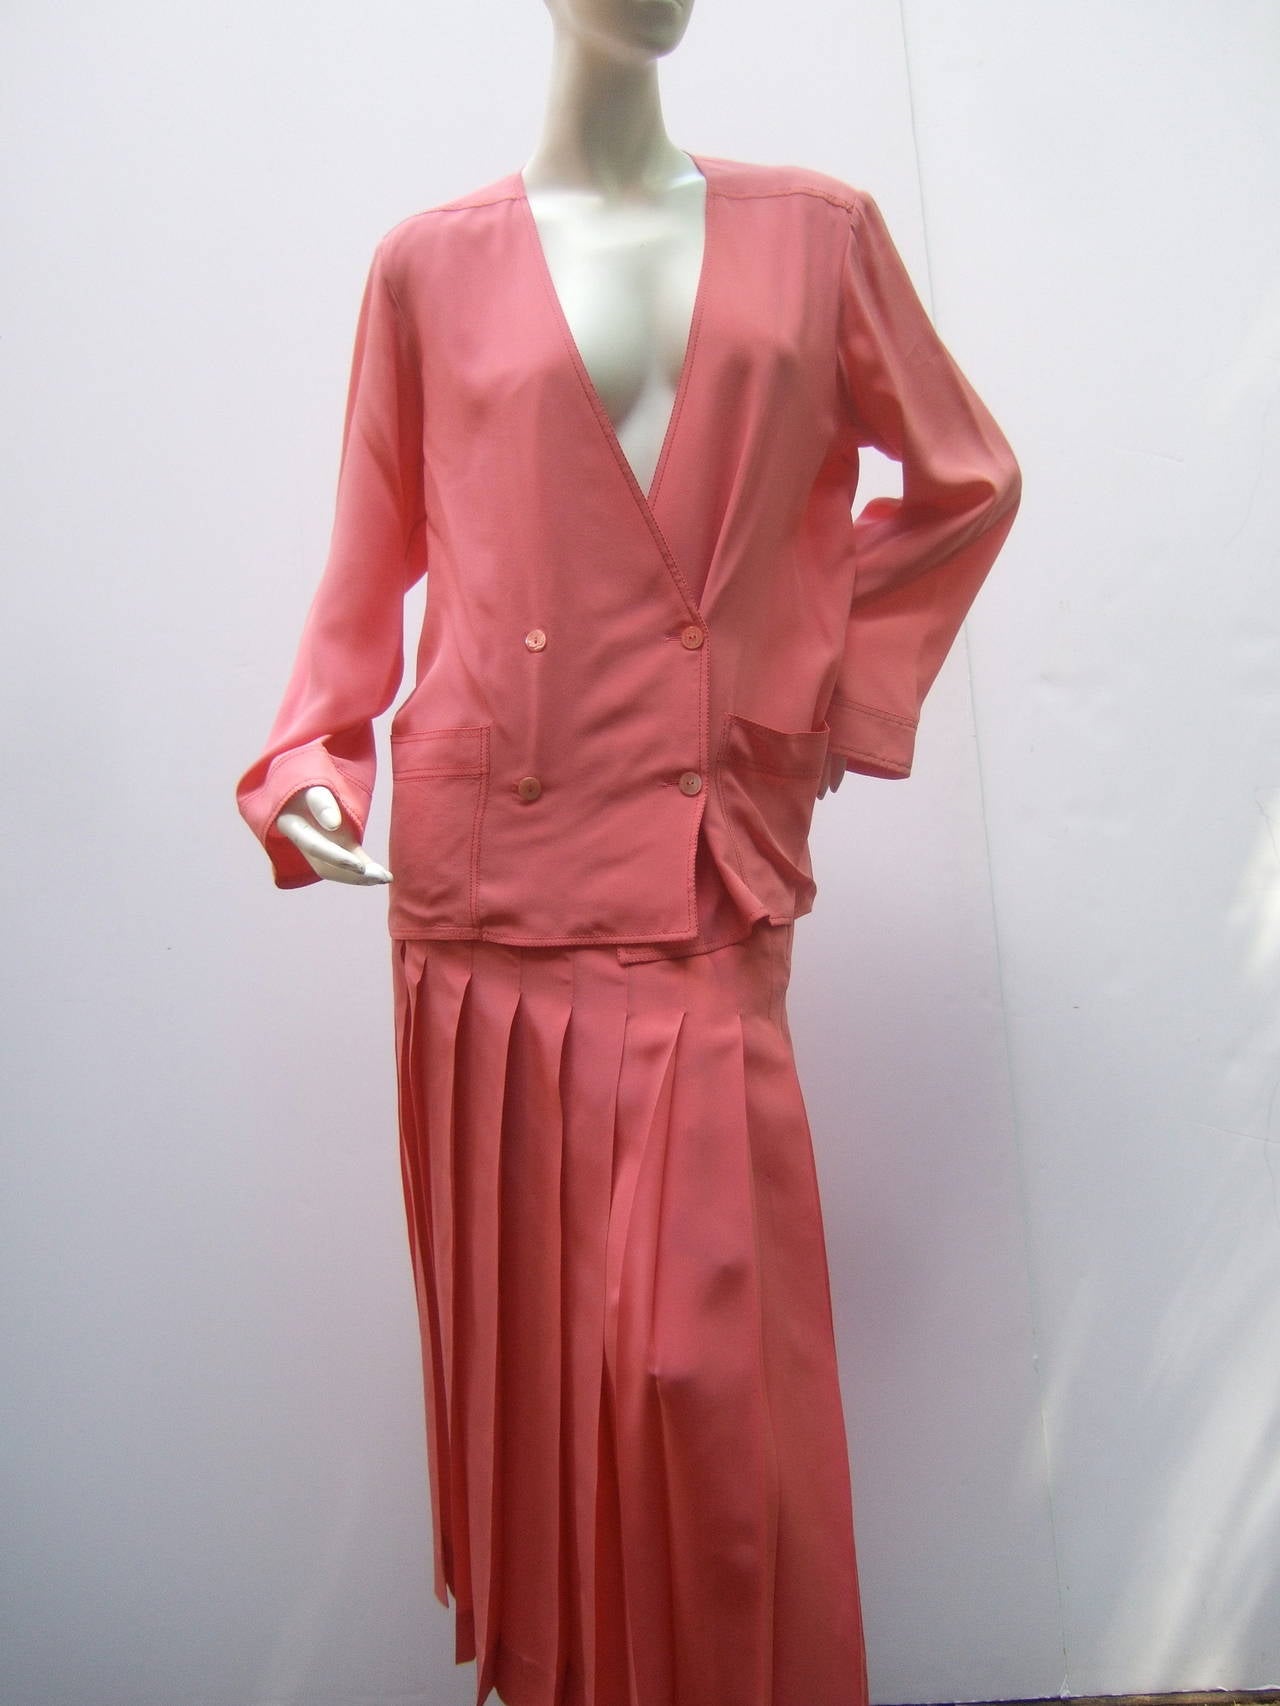 Chanel Vintage silk salmon pink skirt suit c 1980
The elegant skirt suit is designed with luxurious silk
The stylish boxy double breasted jacket has a deep v-neck
design with four Chanel mother of pearl shell C.C buttons
The lower front of the